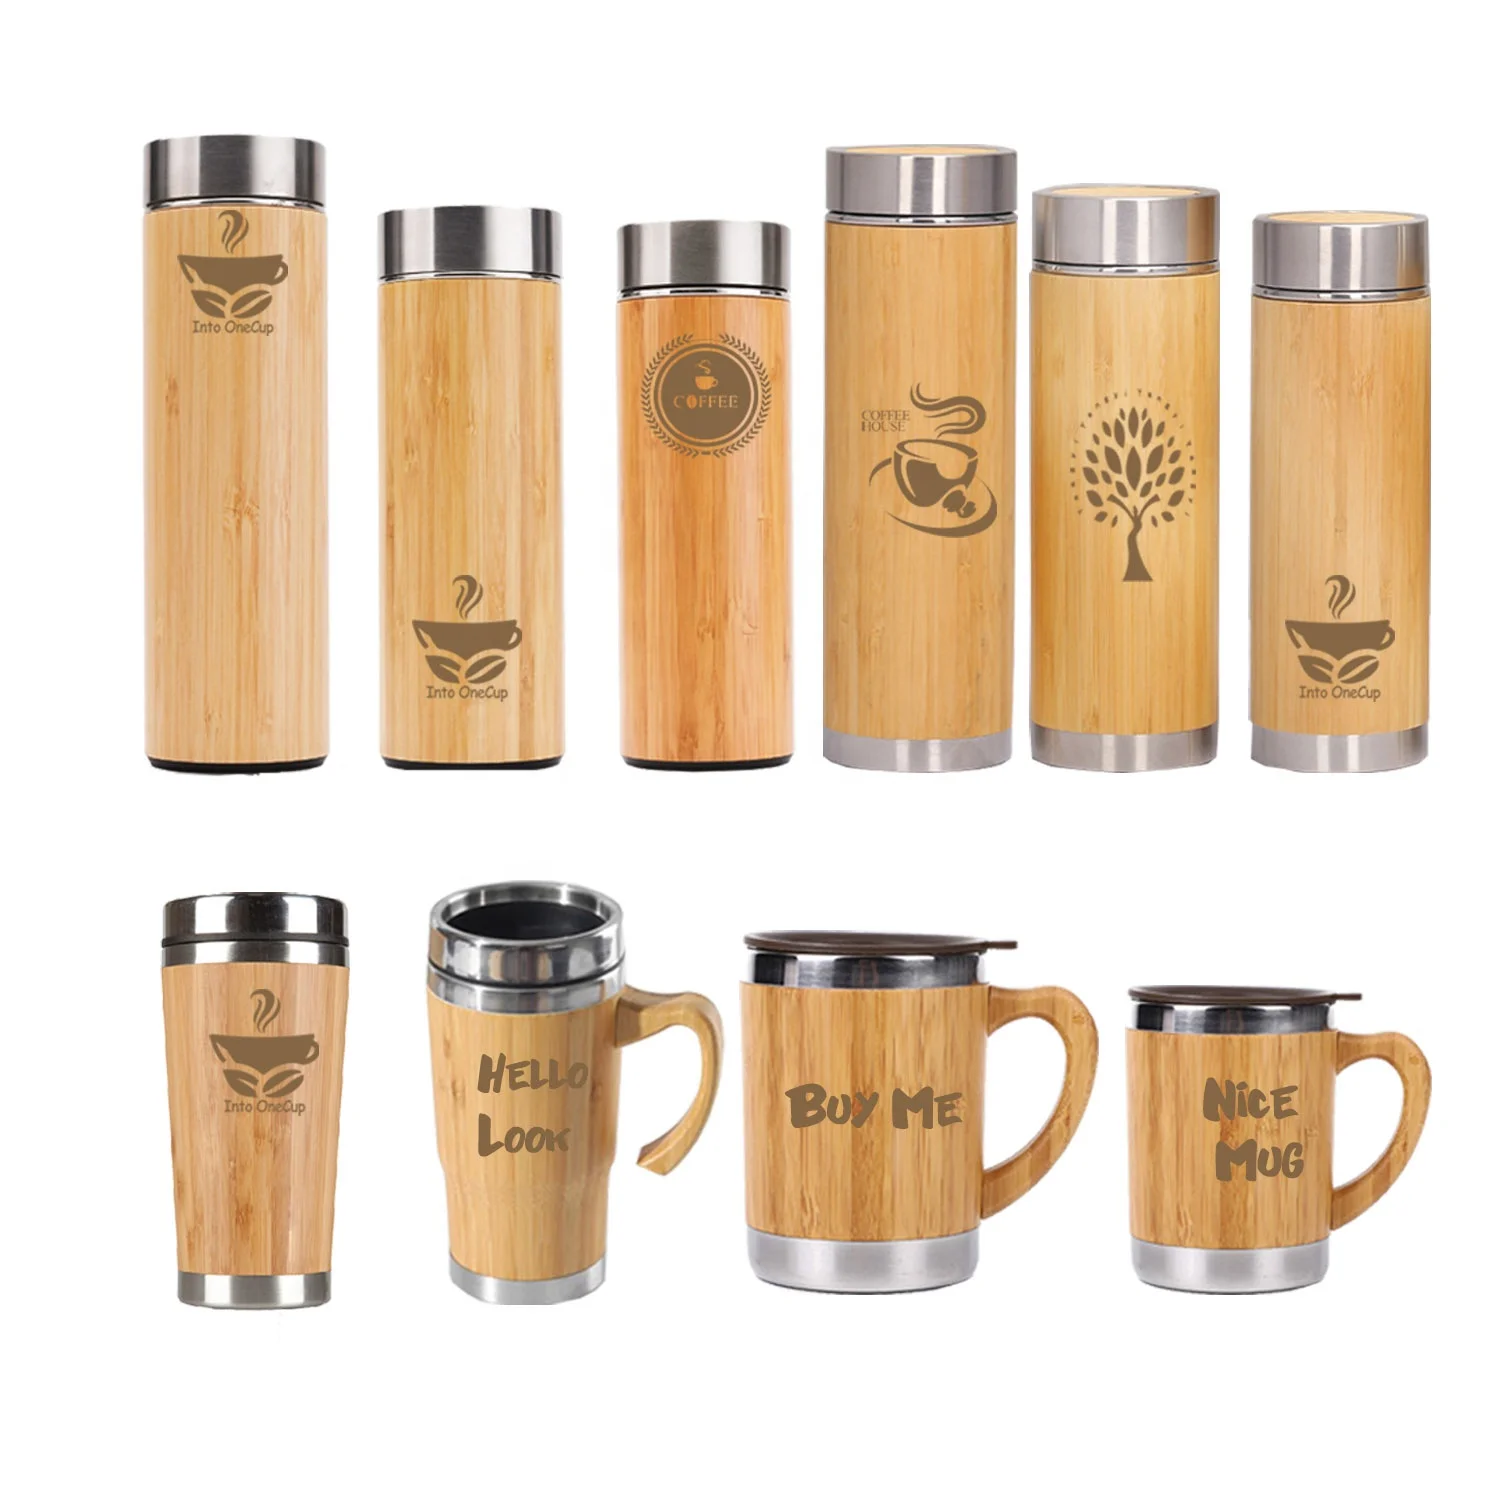 

Natural 17oz 18/8 Double Wall Insulated Stainless Steel Wood Bamboo Tea Coffee Tumblers Mugs with Loose Leaf tea infuser, Natural bamboo color